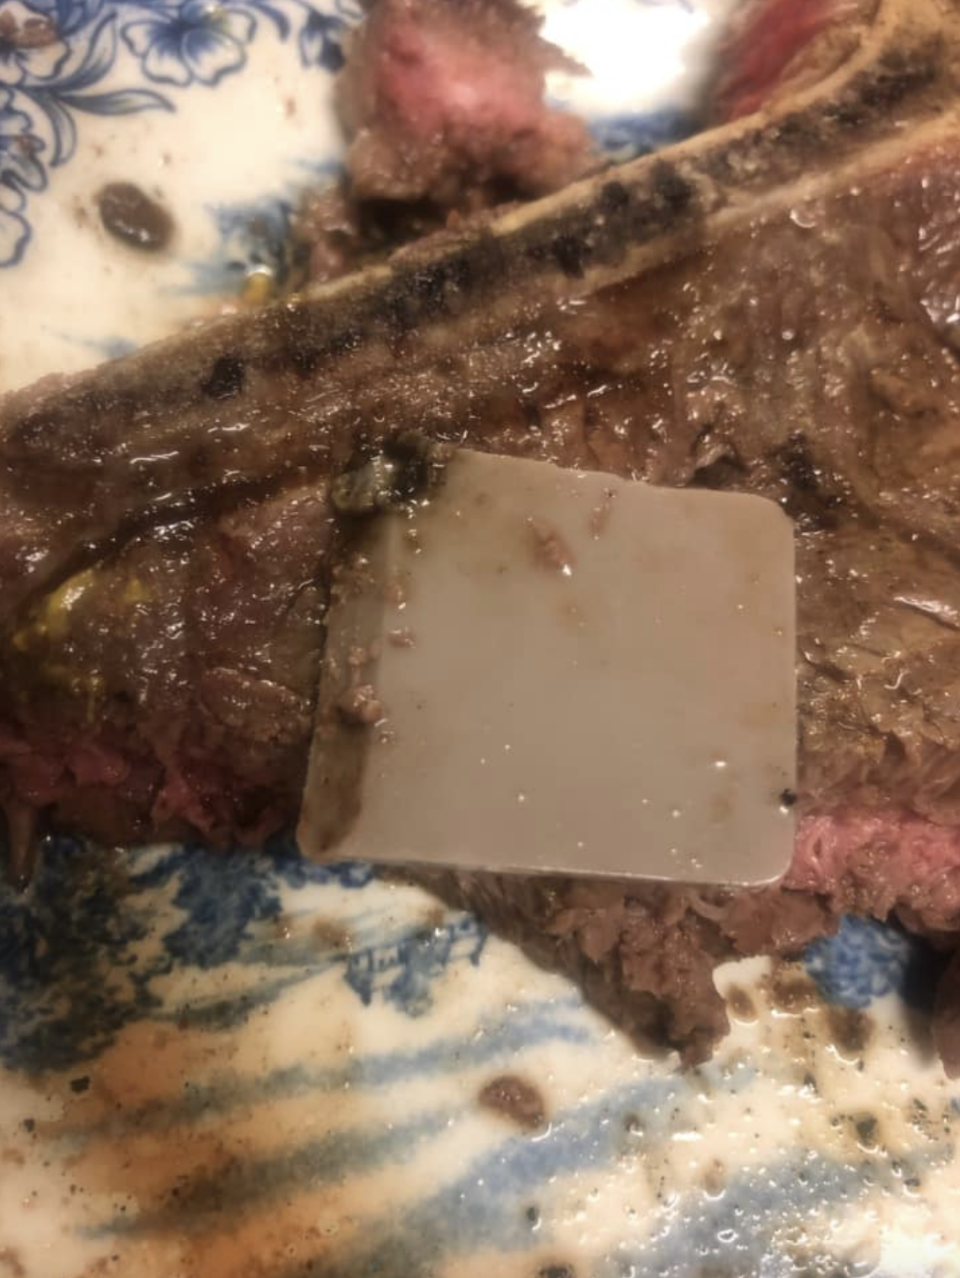 Plastic lodged into T-bone steak from Coles.